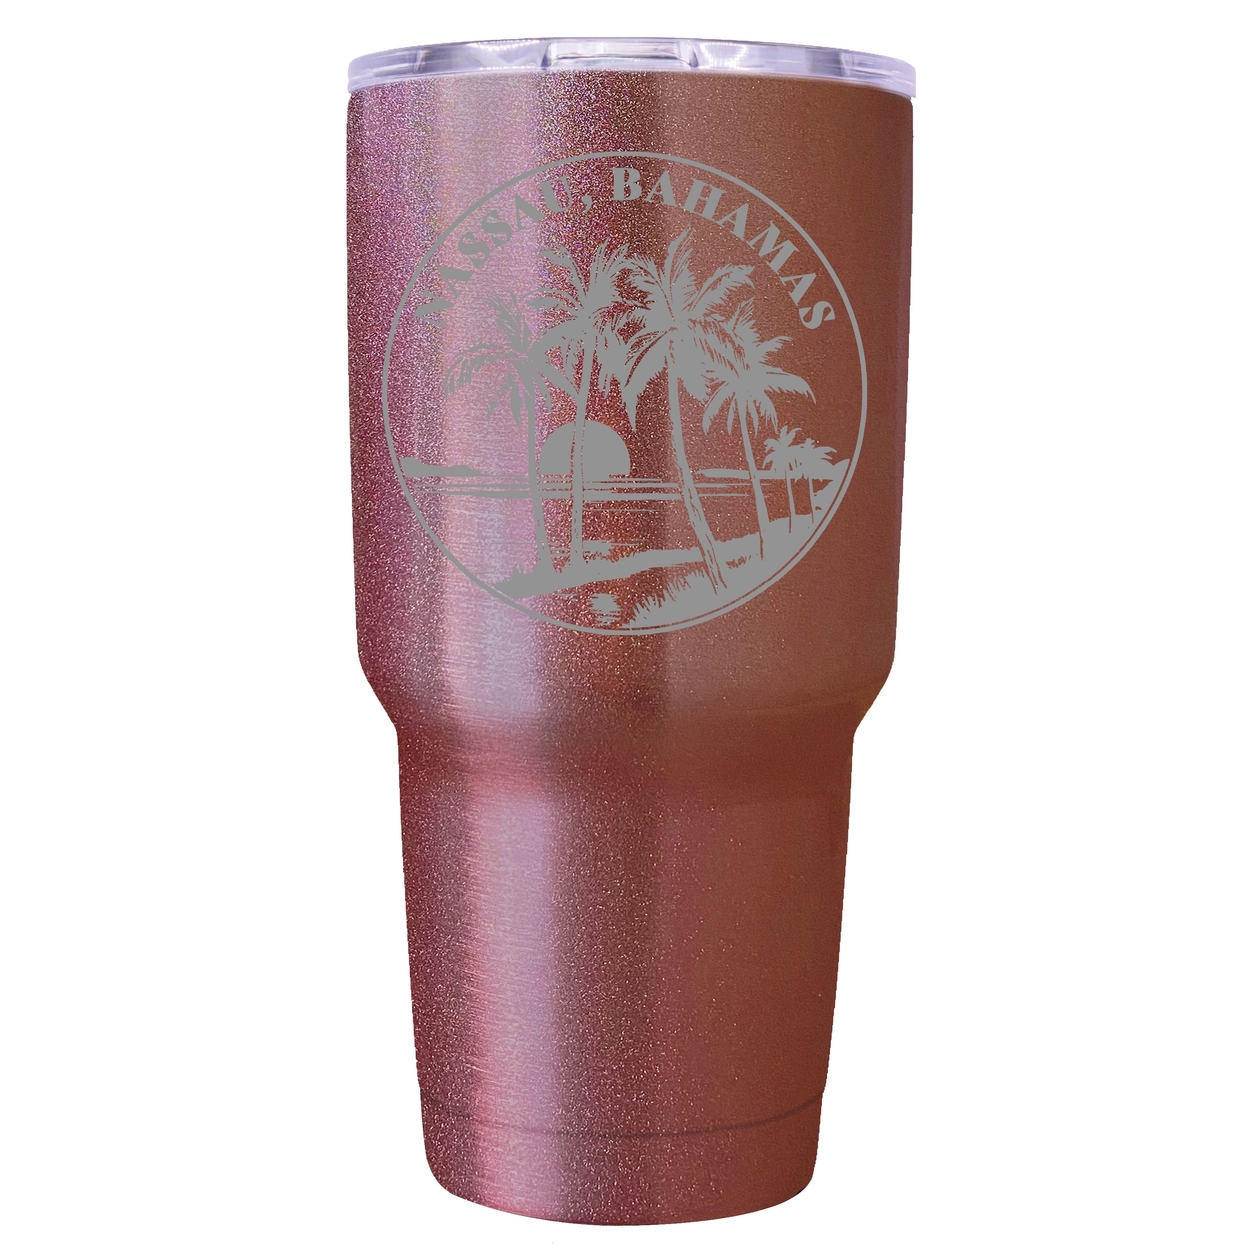 Nassau The Bahamas Souvenir 24 Oz Engraved Insulated Stainless Steel Tumbler - Green,,2-Pack